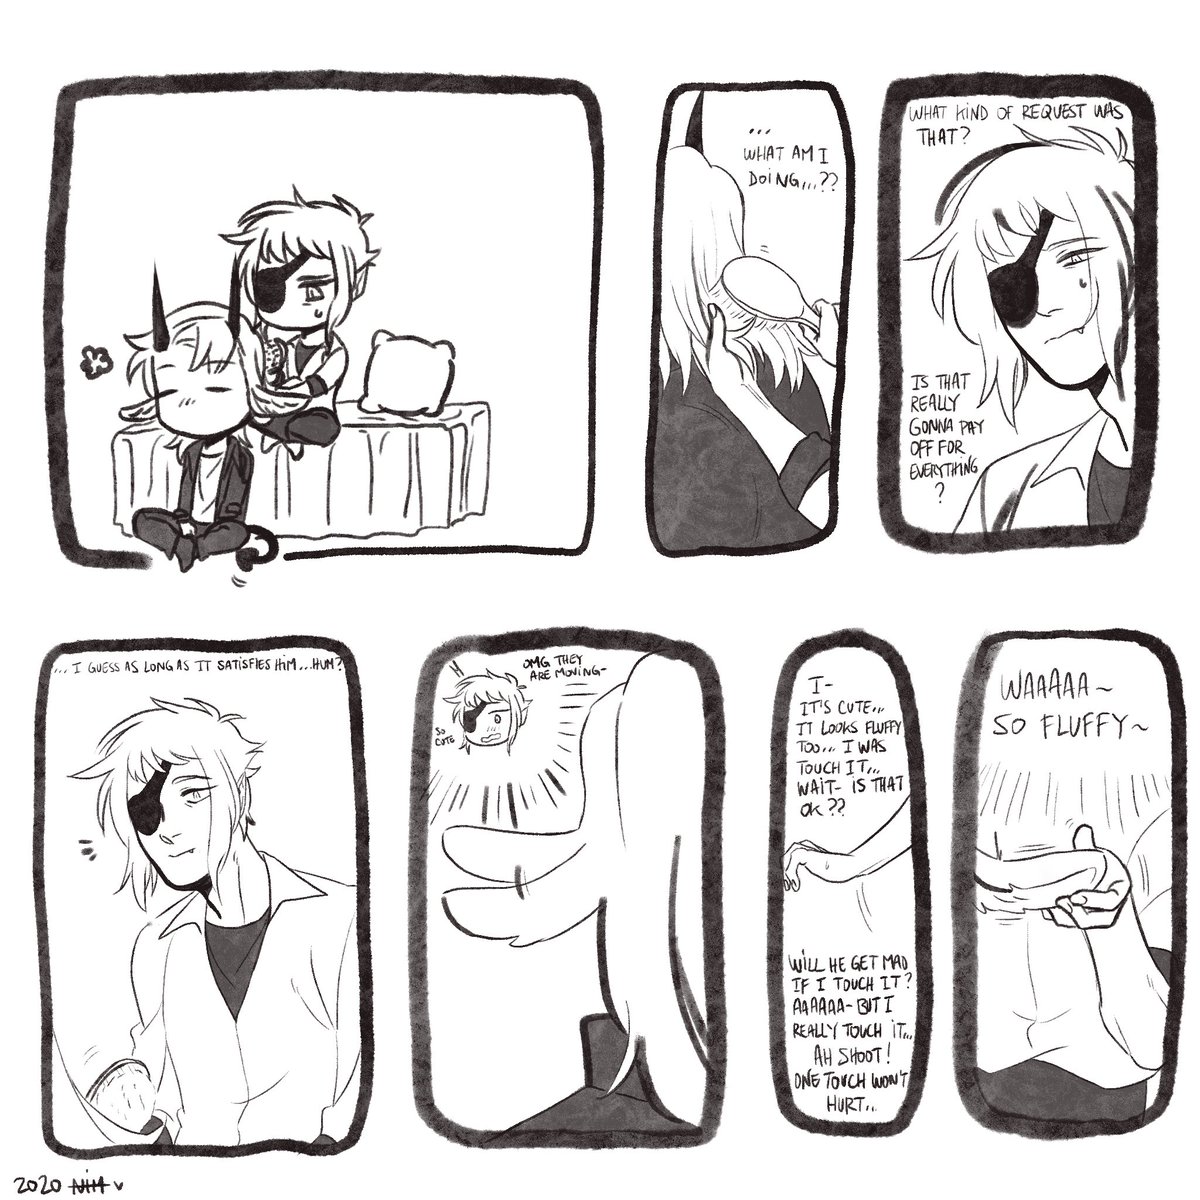 So,,,,I made a lil comic about Will and Nicholas, hope you enjoy HSBSBBD
1/2

#万圣街 #allsaintsstreet #willcolas 